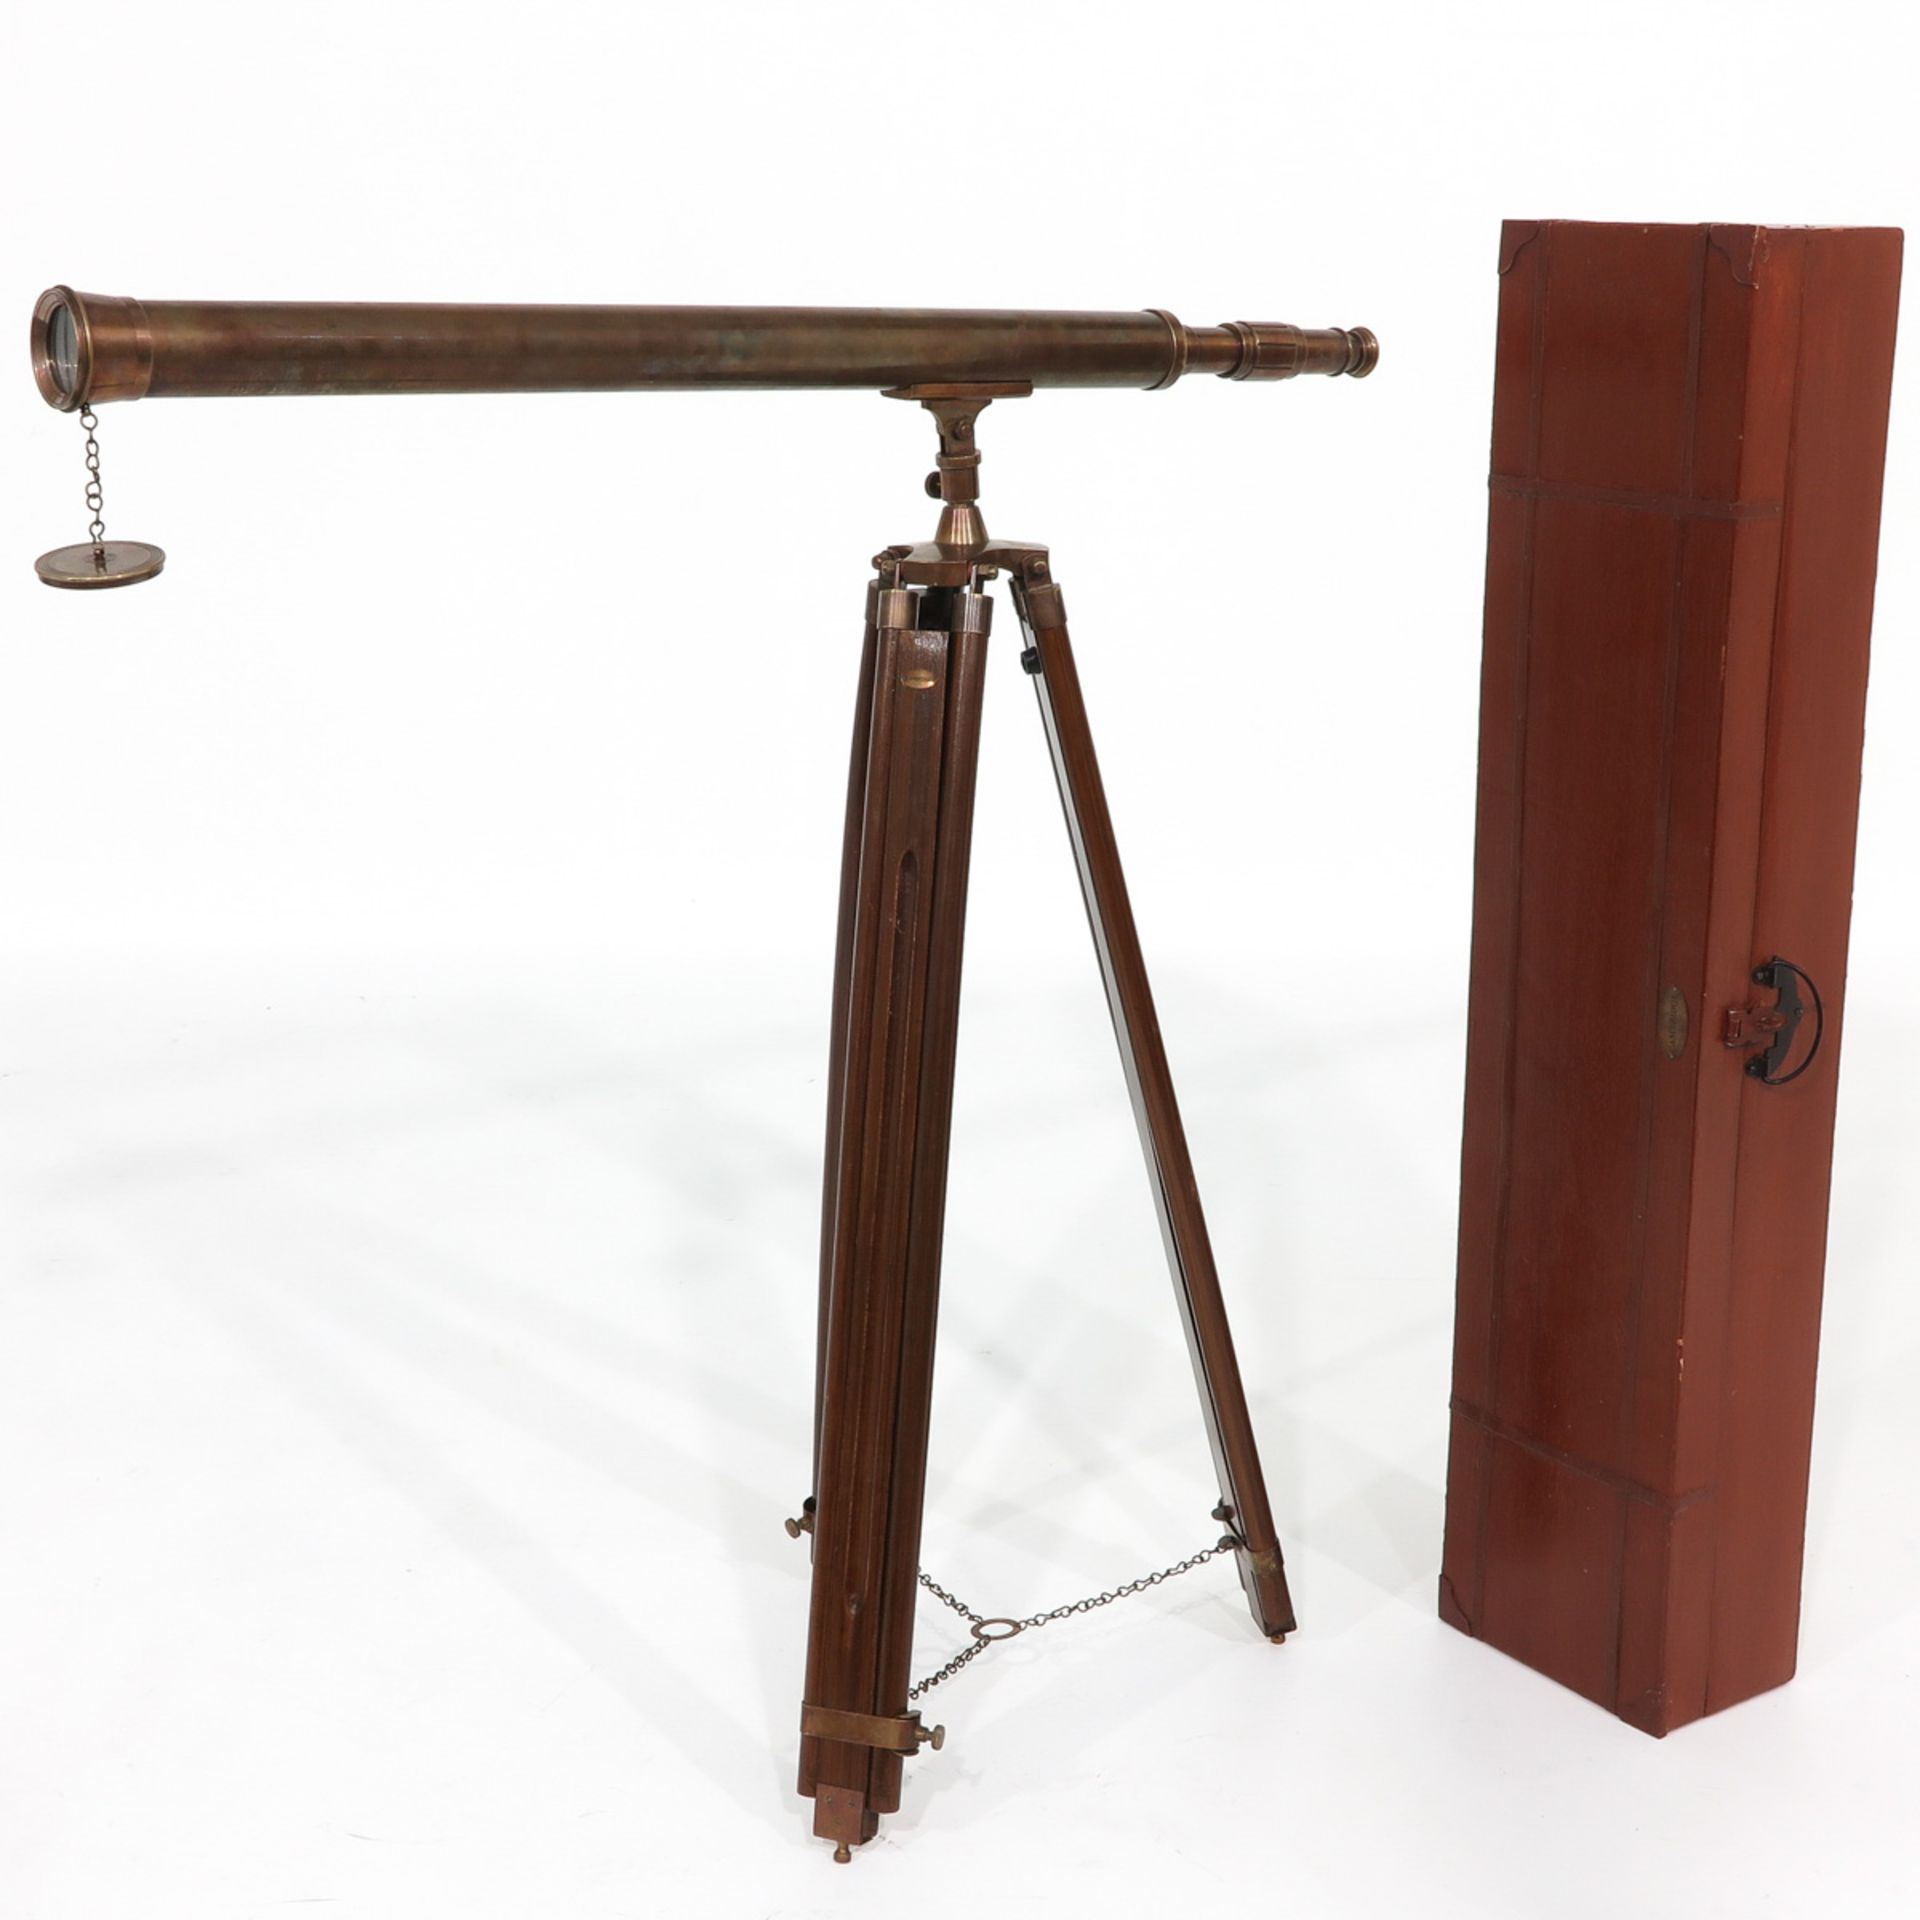 A Telescope Viewer - Image 5 of 10